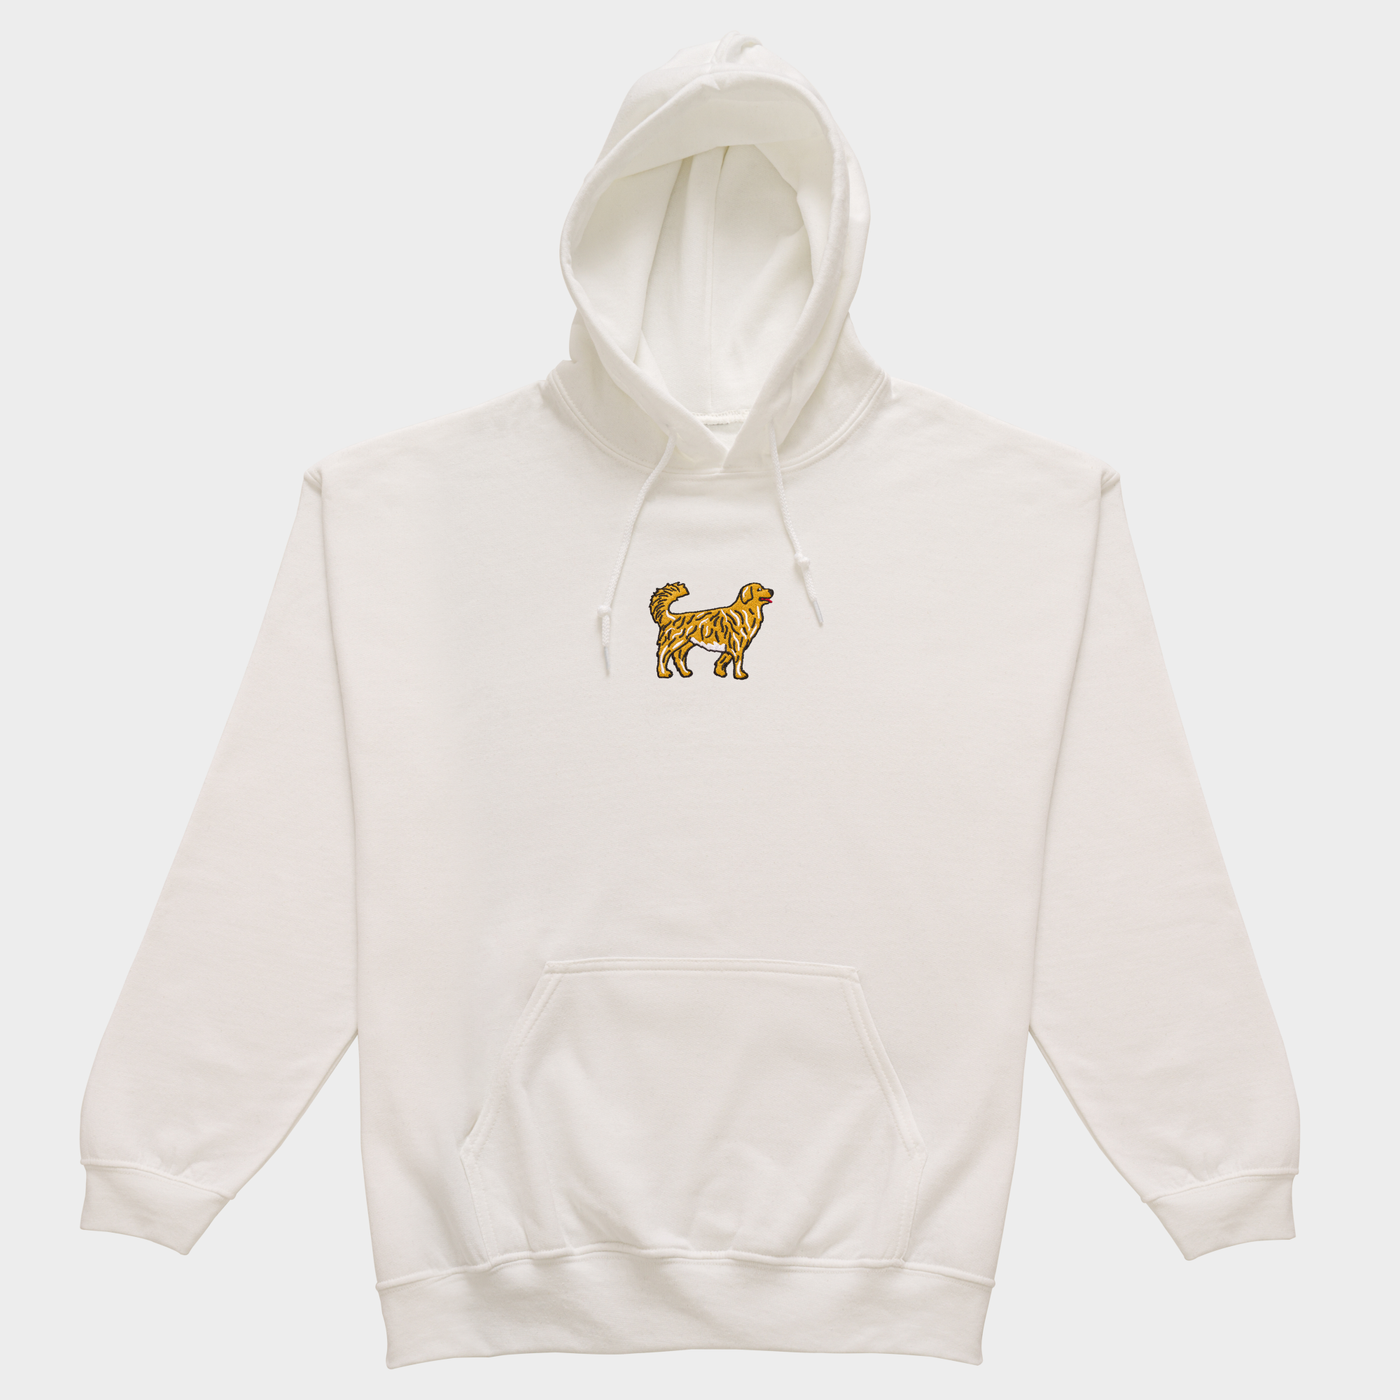 Bobby's Planet Men's Embroidered Golden Retriever Hoodie from Paws Dog Cat Animals Collection in White Color#color_white